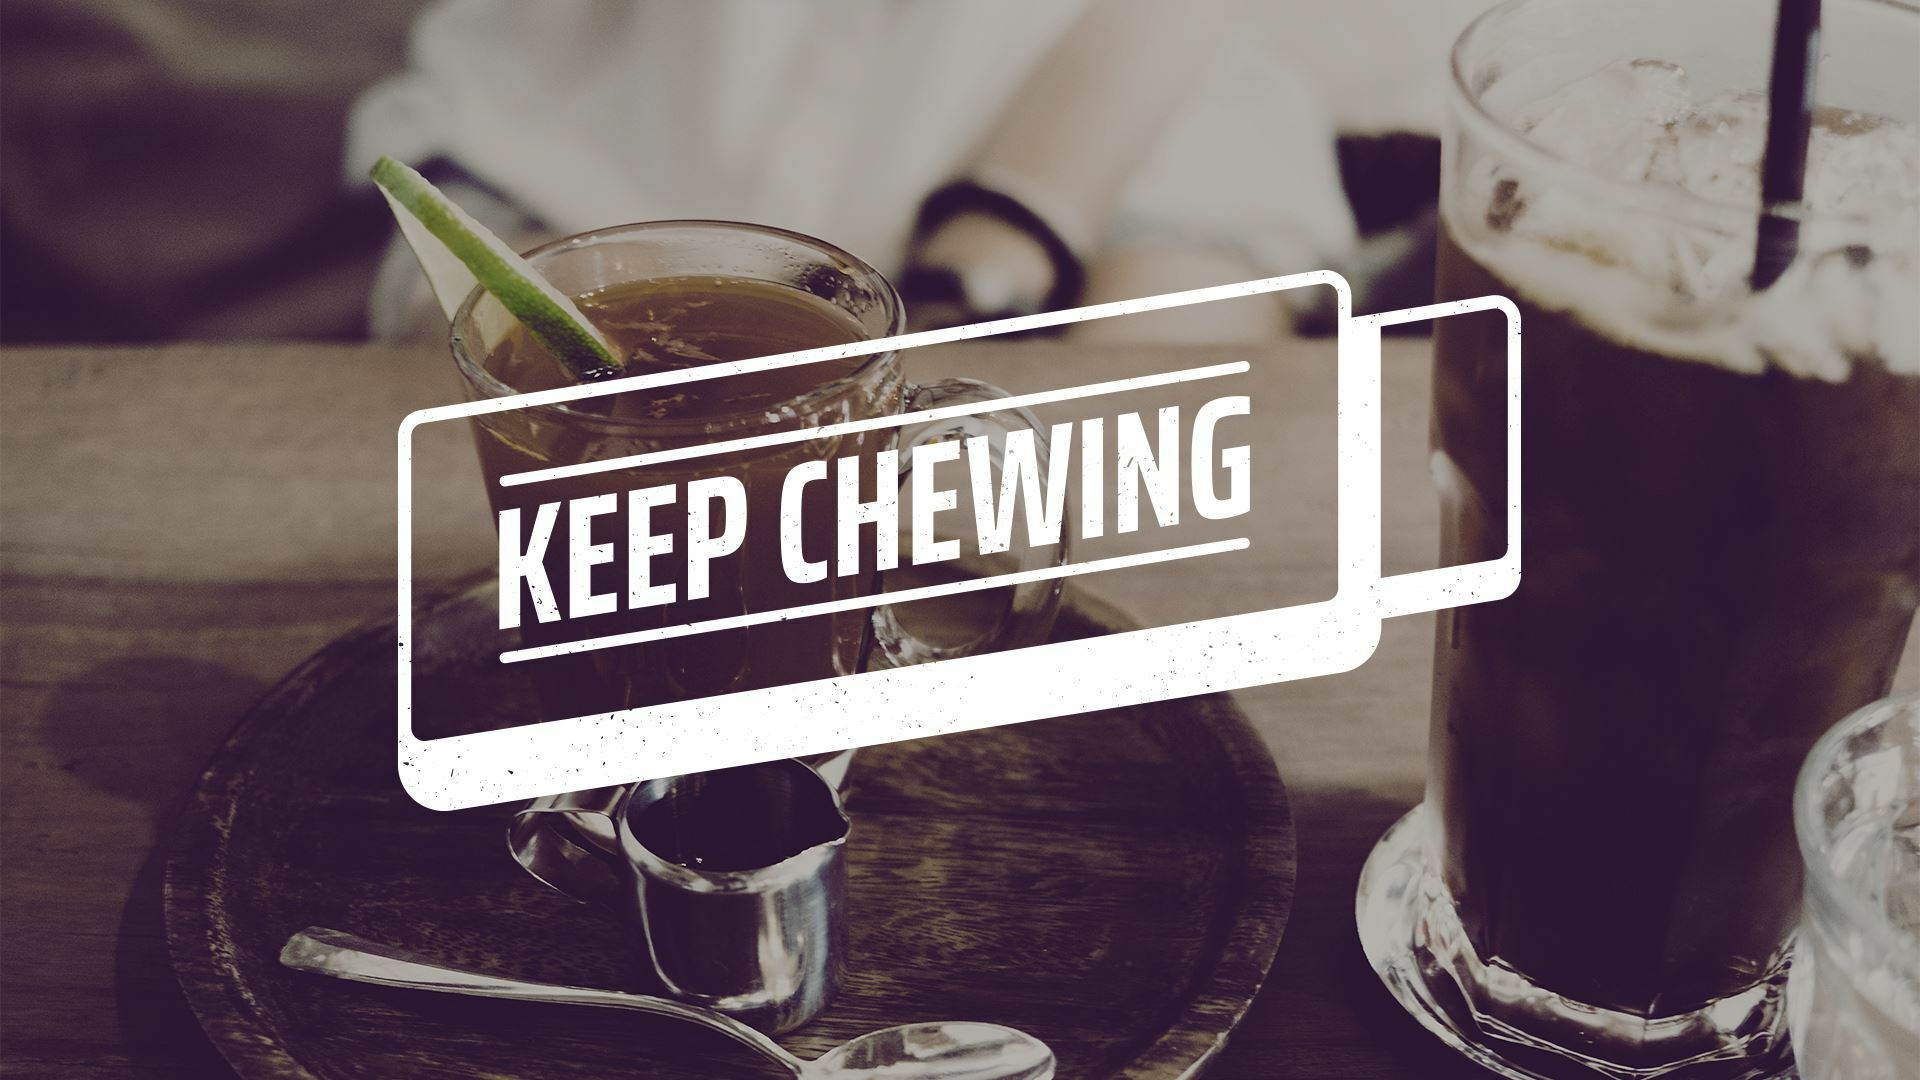 Keep Chewing